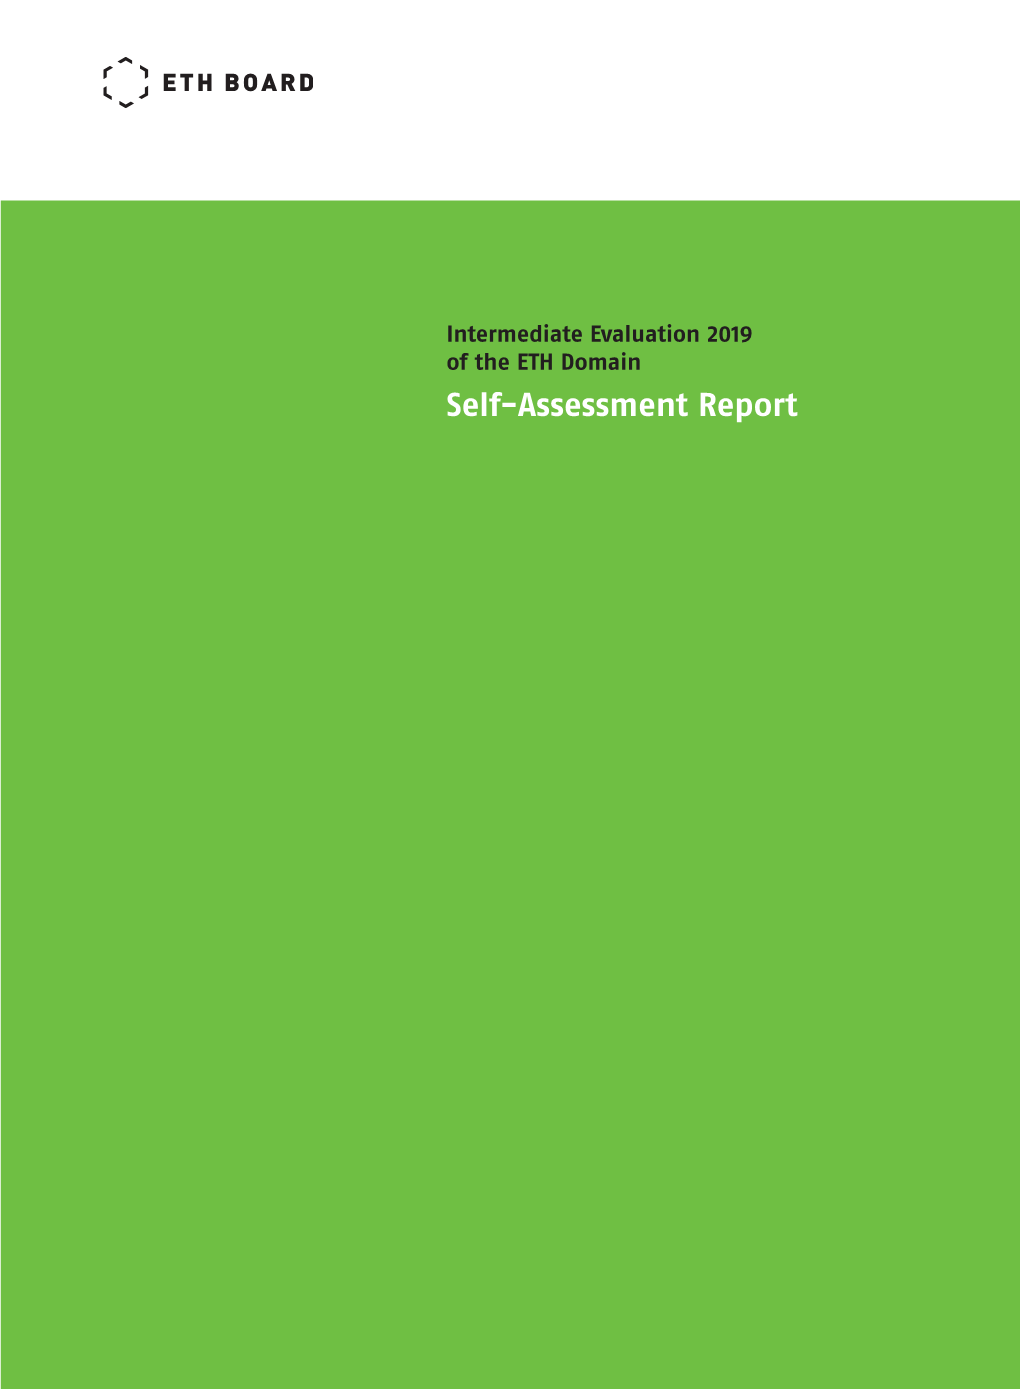 Self-Assessment Report of the ETH Board Table of Contents